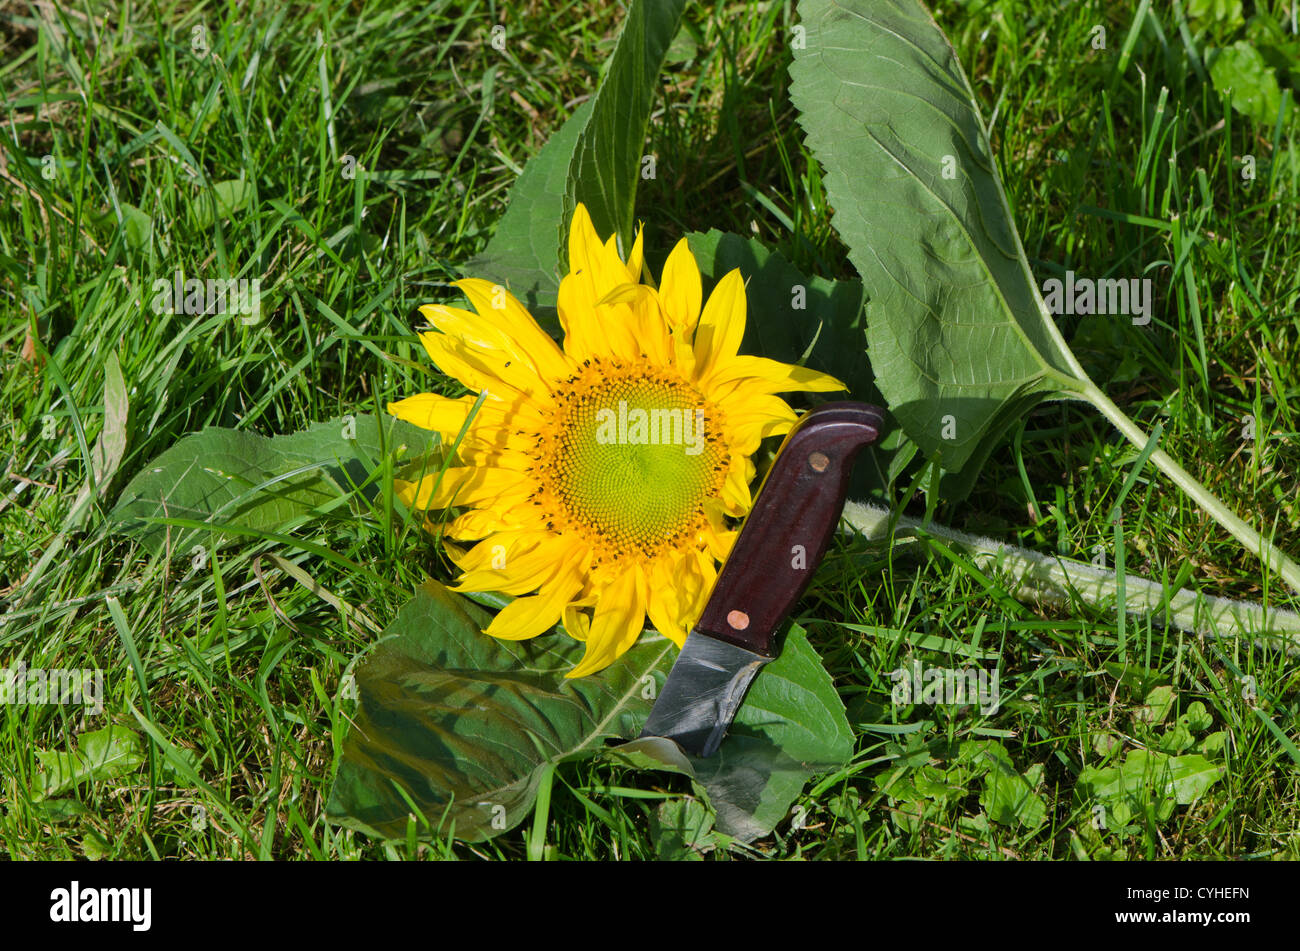 cut unripe sunflower head on grass and knife with wooden handle stuck in ground. Stock Photo